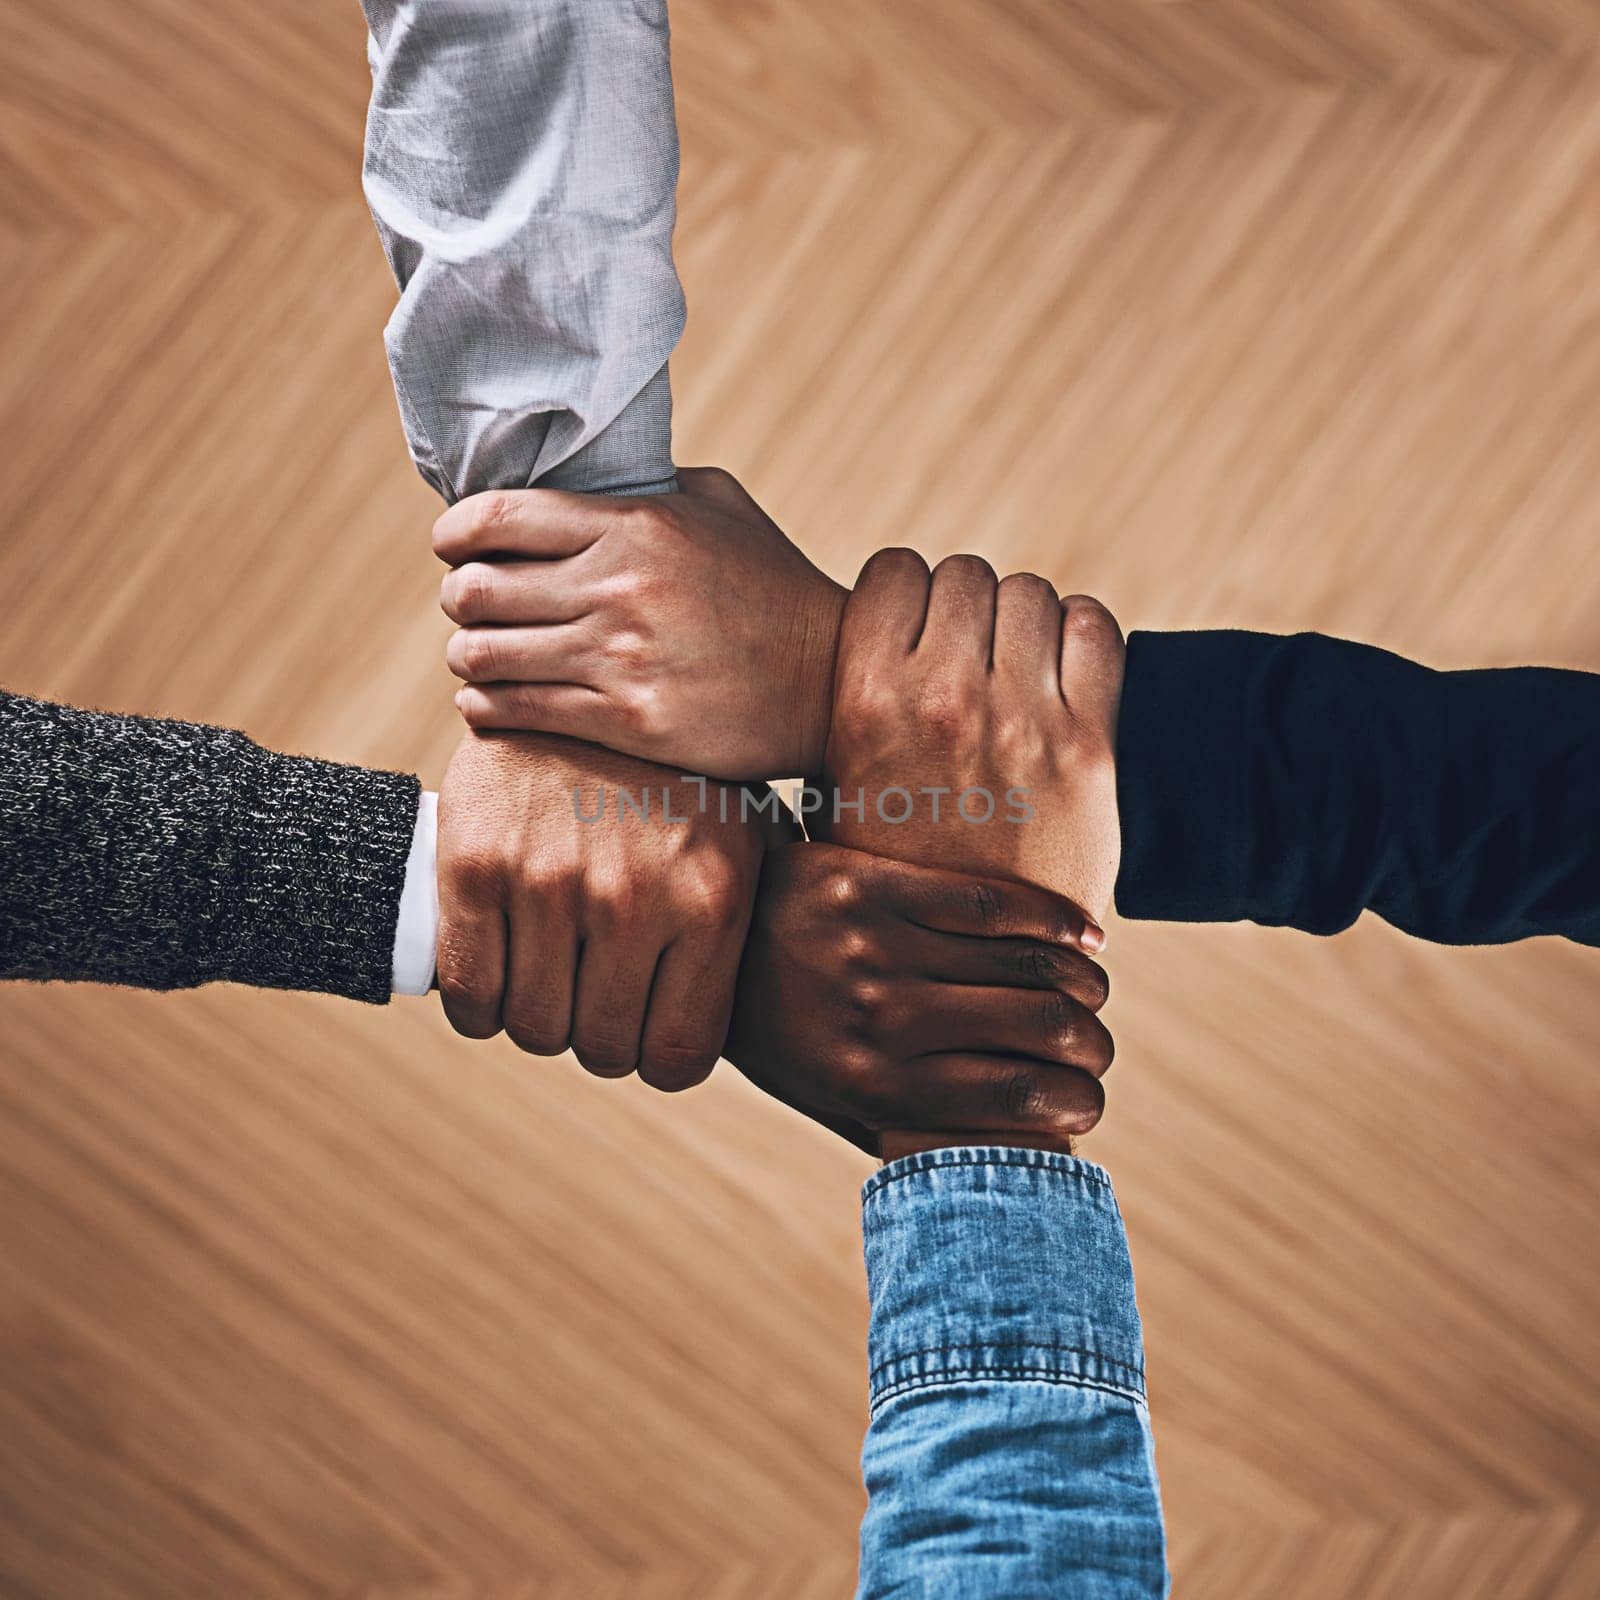 Collaboration, link or hands of business people with diversity for community support or teamwork in office. Zoom, above or group of employees with joint mission, trust or hope for goals together.